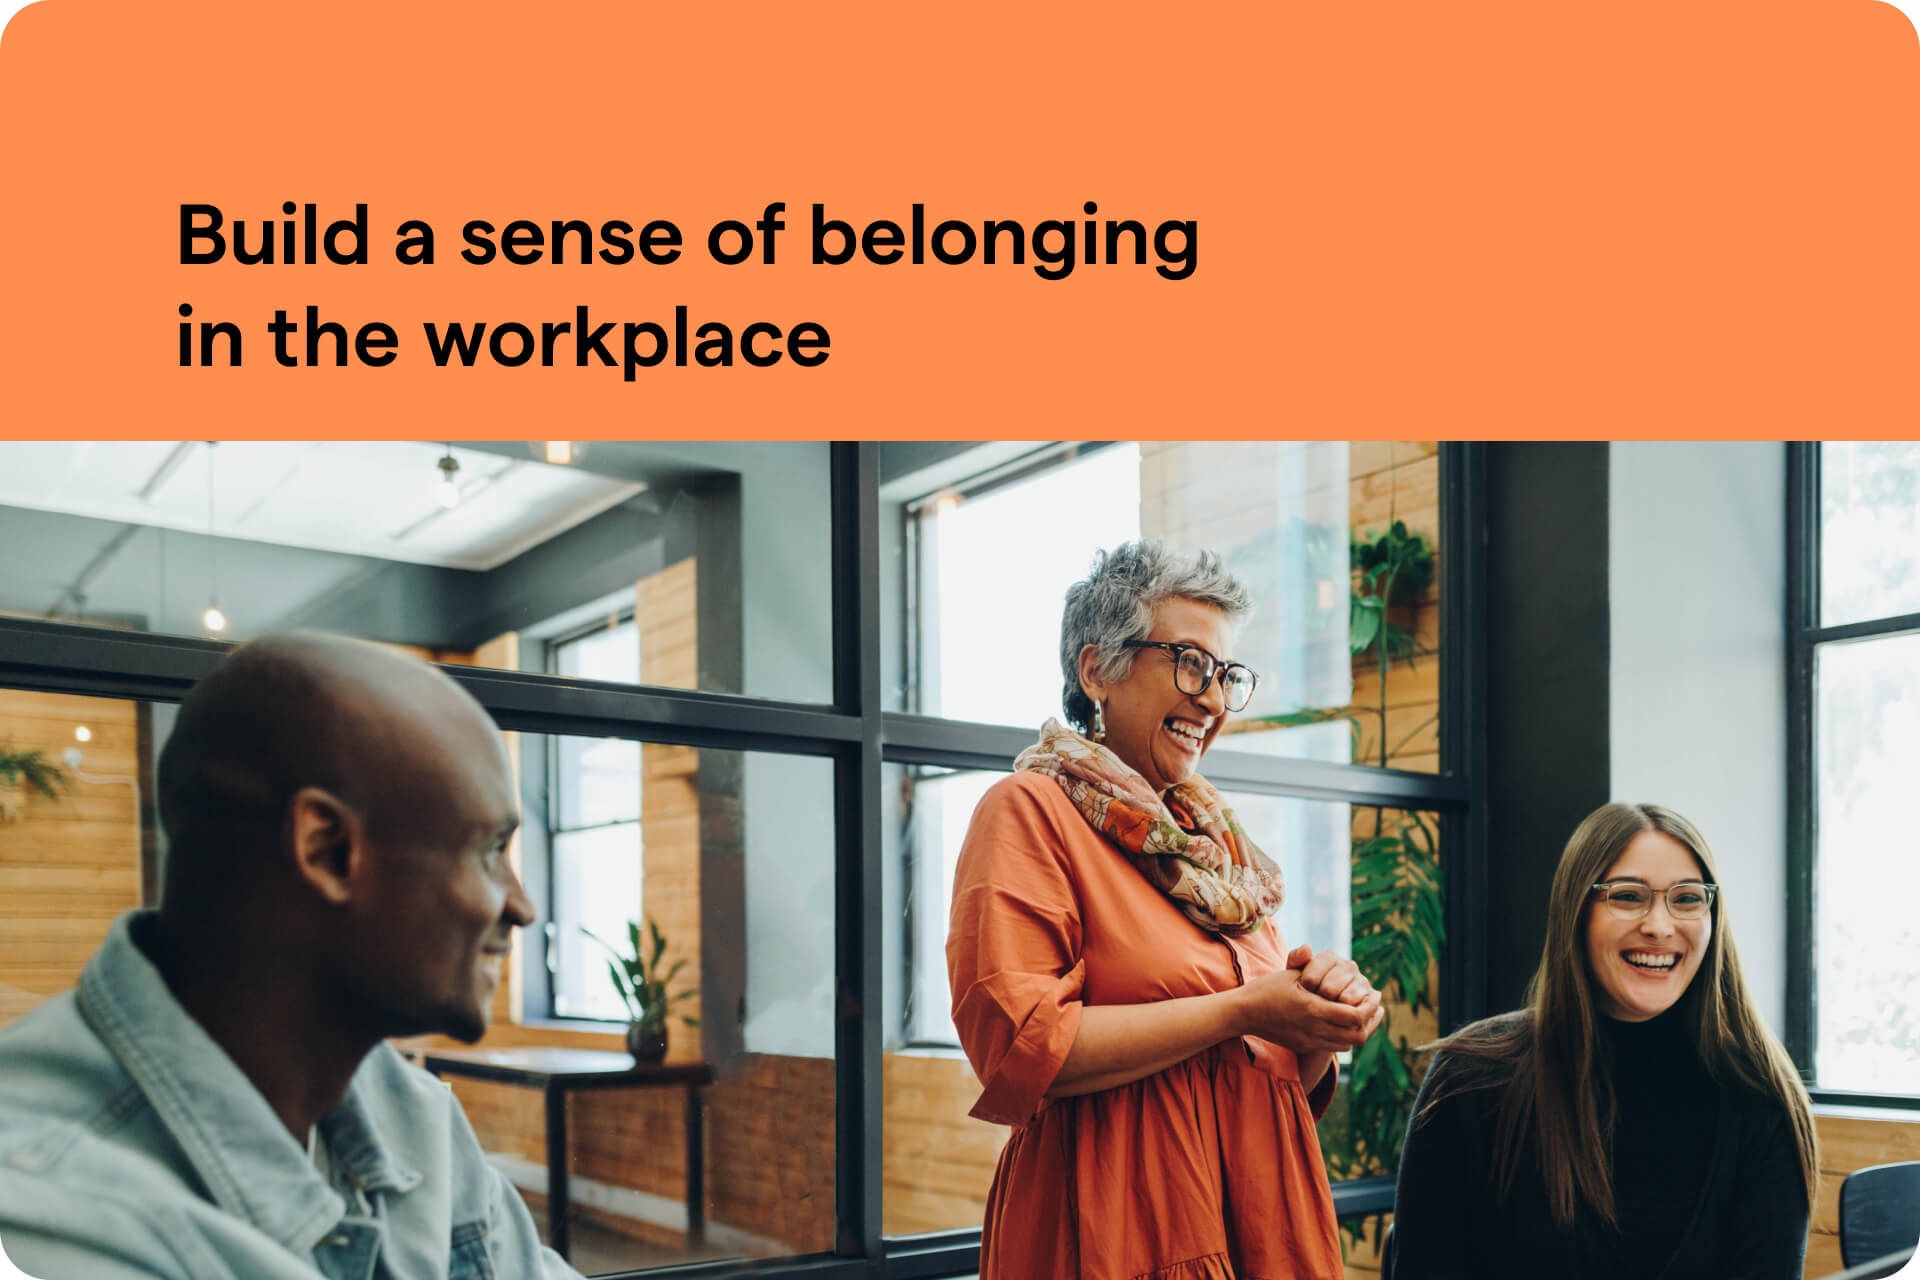 Build a sense of belonging in the workplace